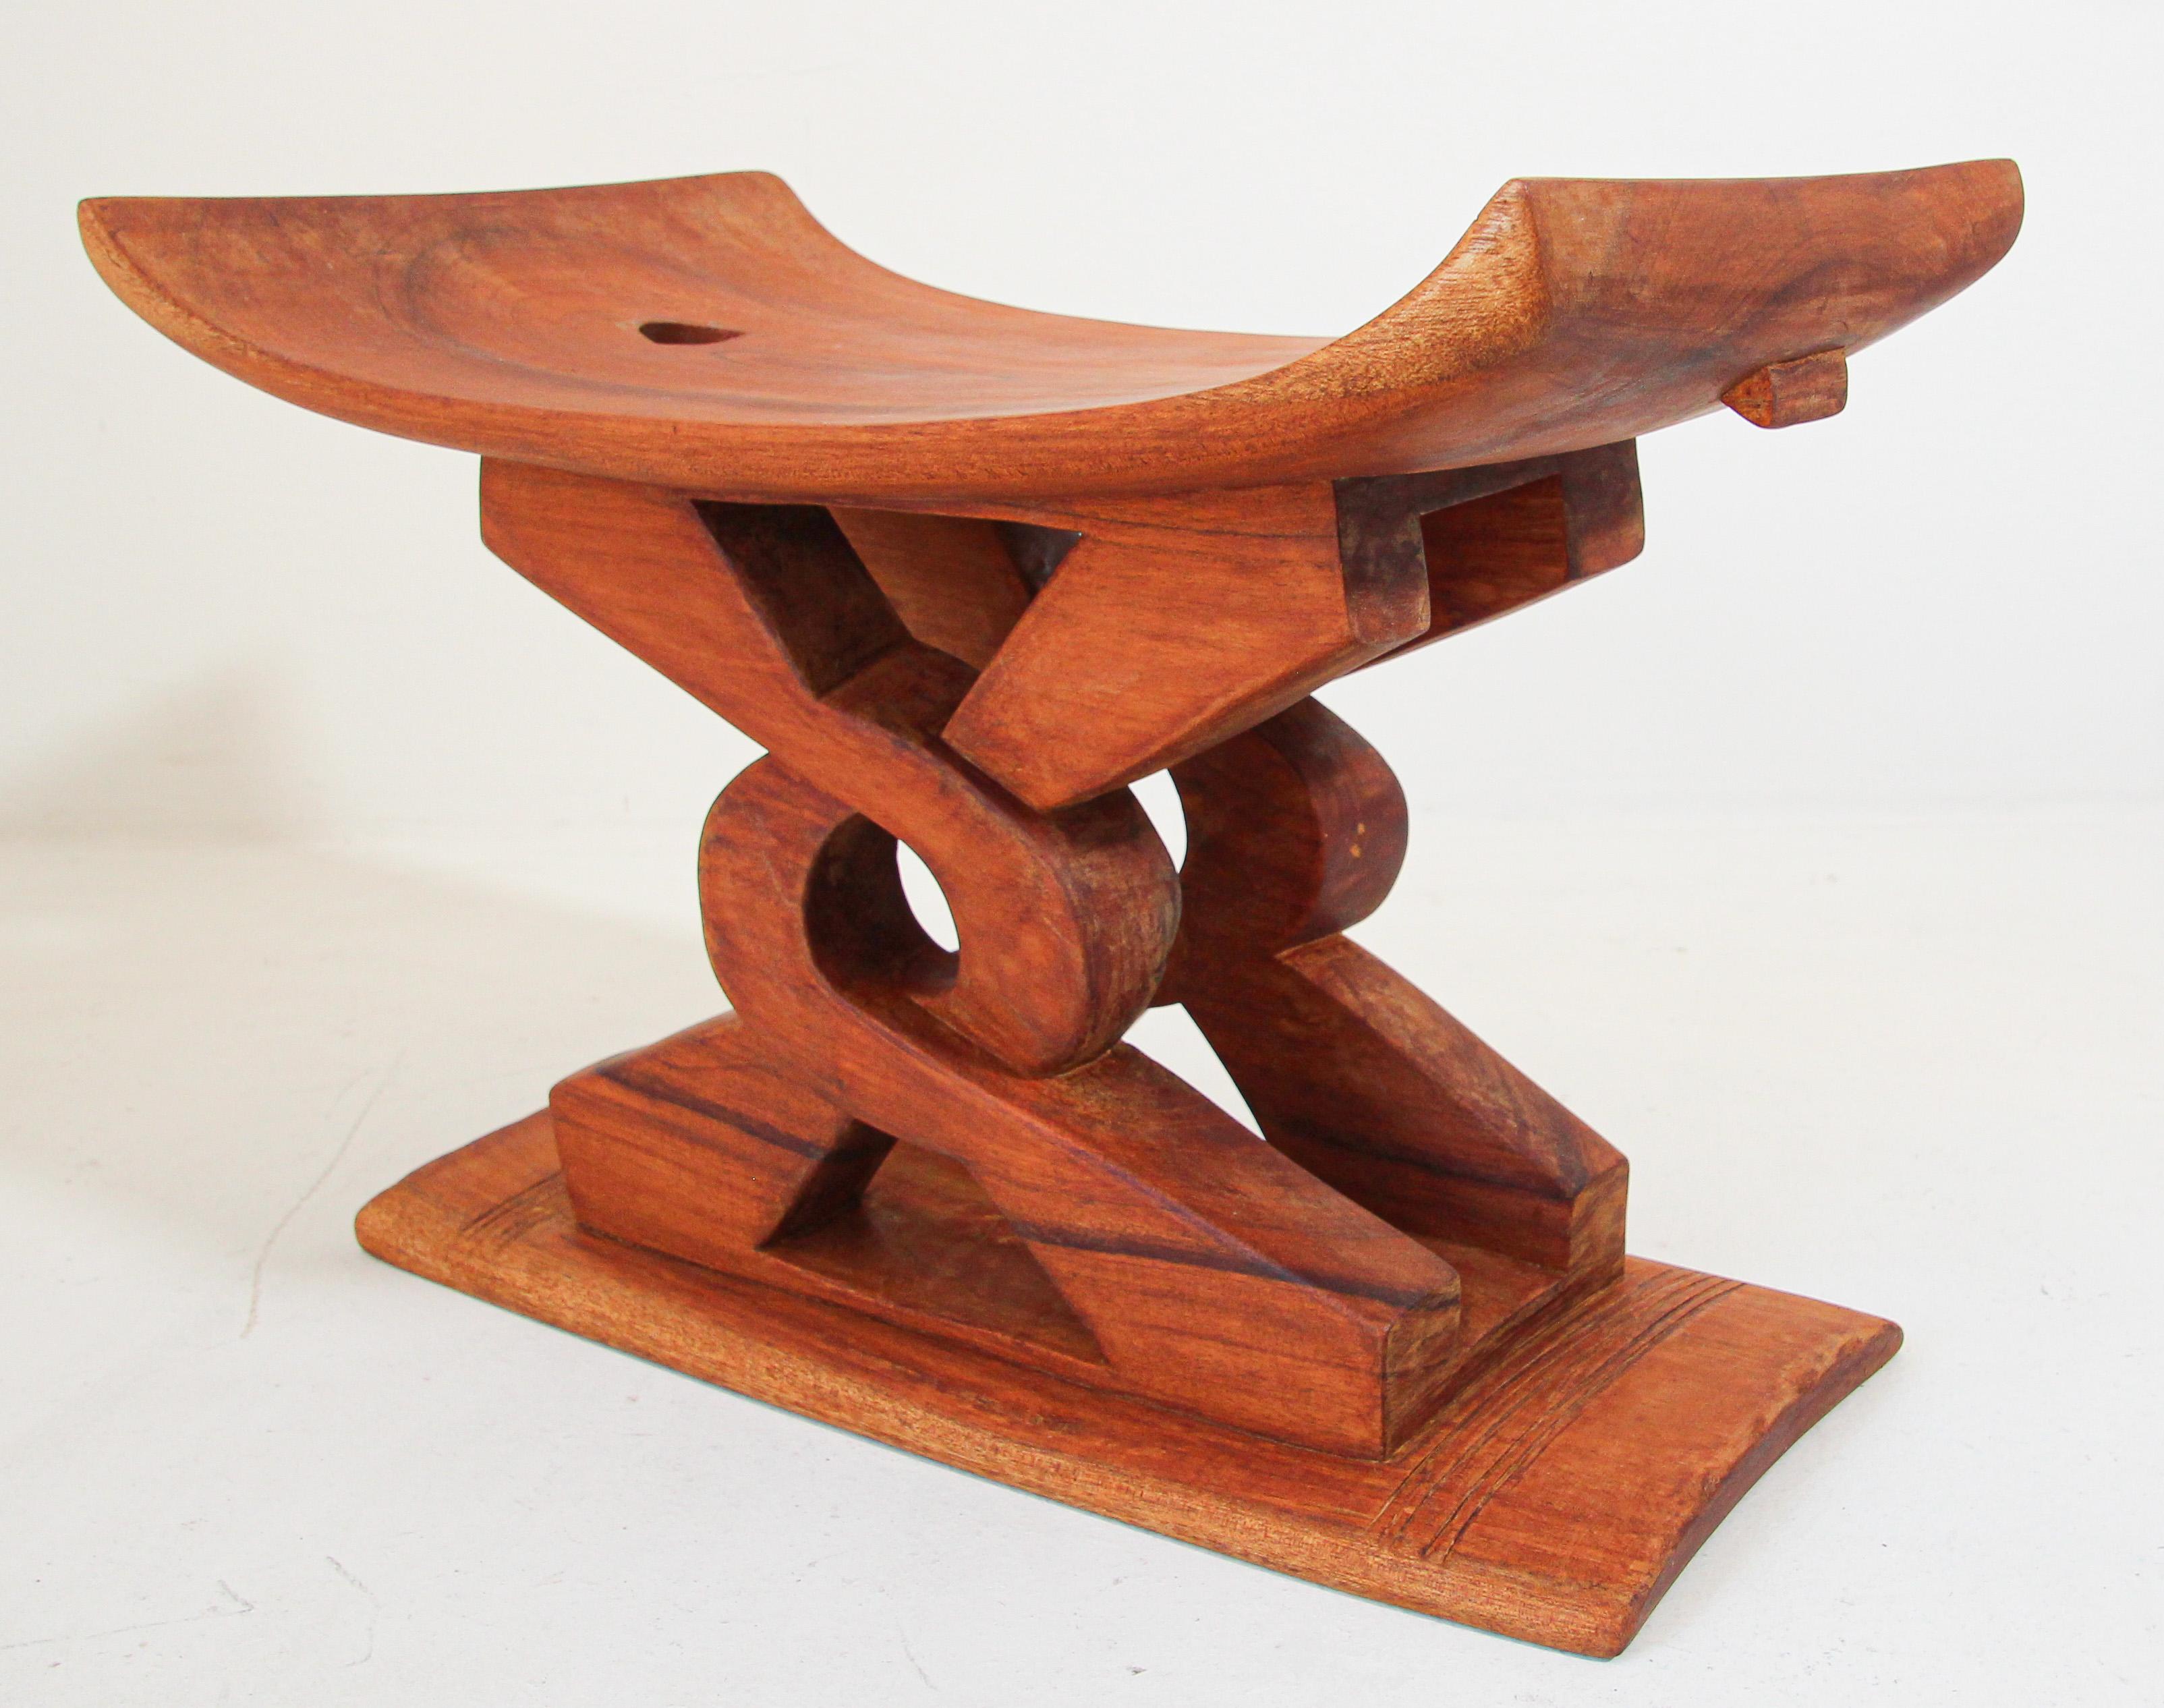 African Tribal handcrafted Ghanaian Ashanti 'Wisdom Knot' Stool Africa.
A carved wooden African stool having a curved seat raised on two carved intertwined wooden supports with a slim plinth base. 
Ghanaian lore explains that the central symbol